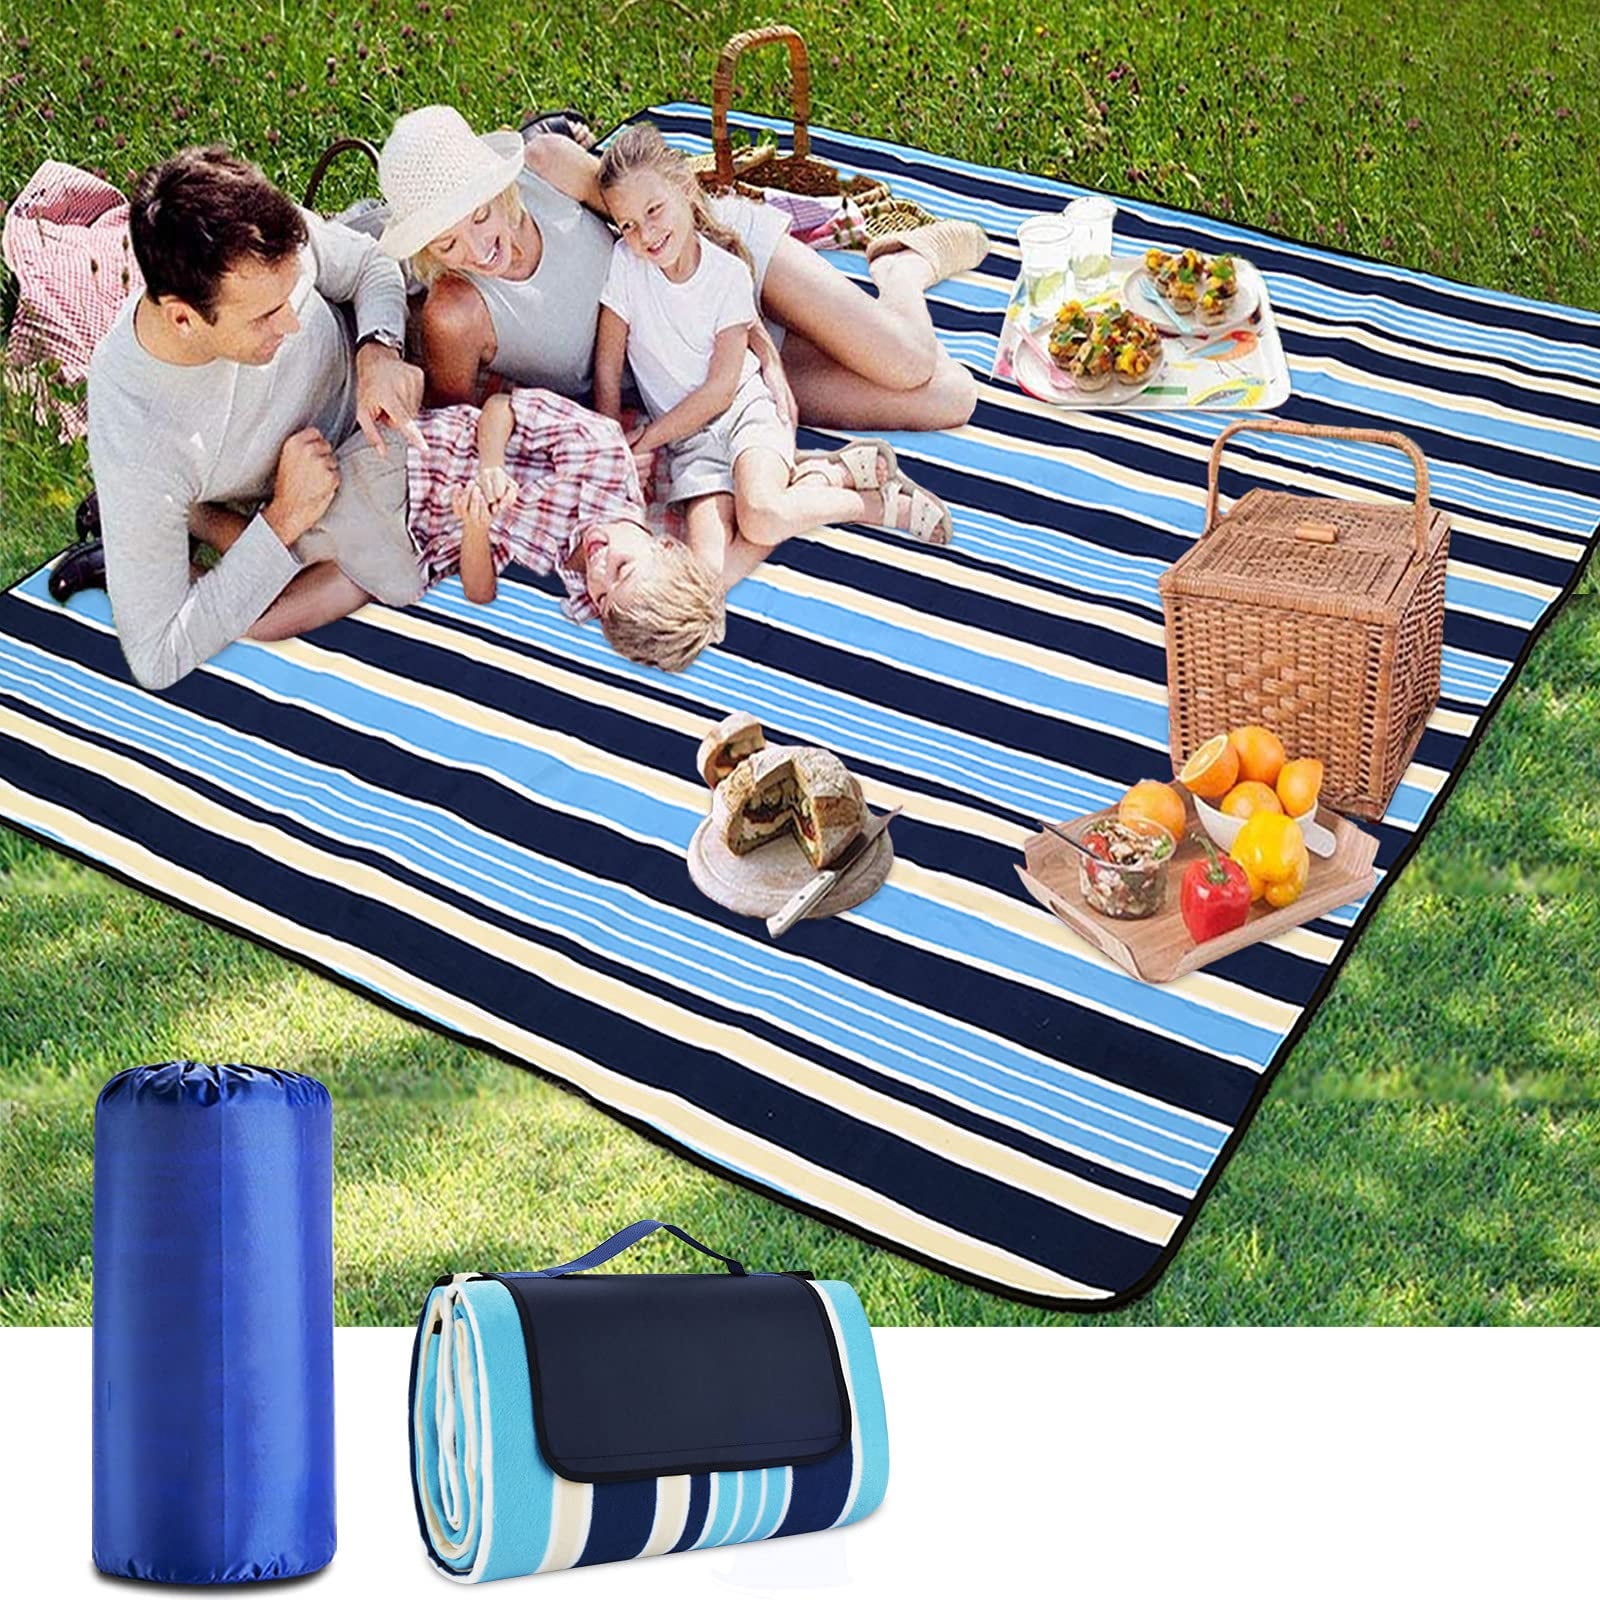 Giwil Picnic Blanket Mat Extra Large Red Stripes, 80 x 60 Concerts Beach Outdoor Camping Blanket Beach Mat with Waterproof Backing for Family Park